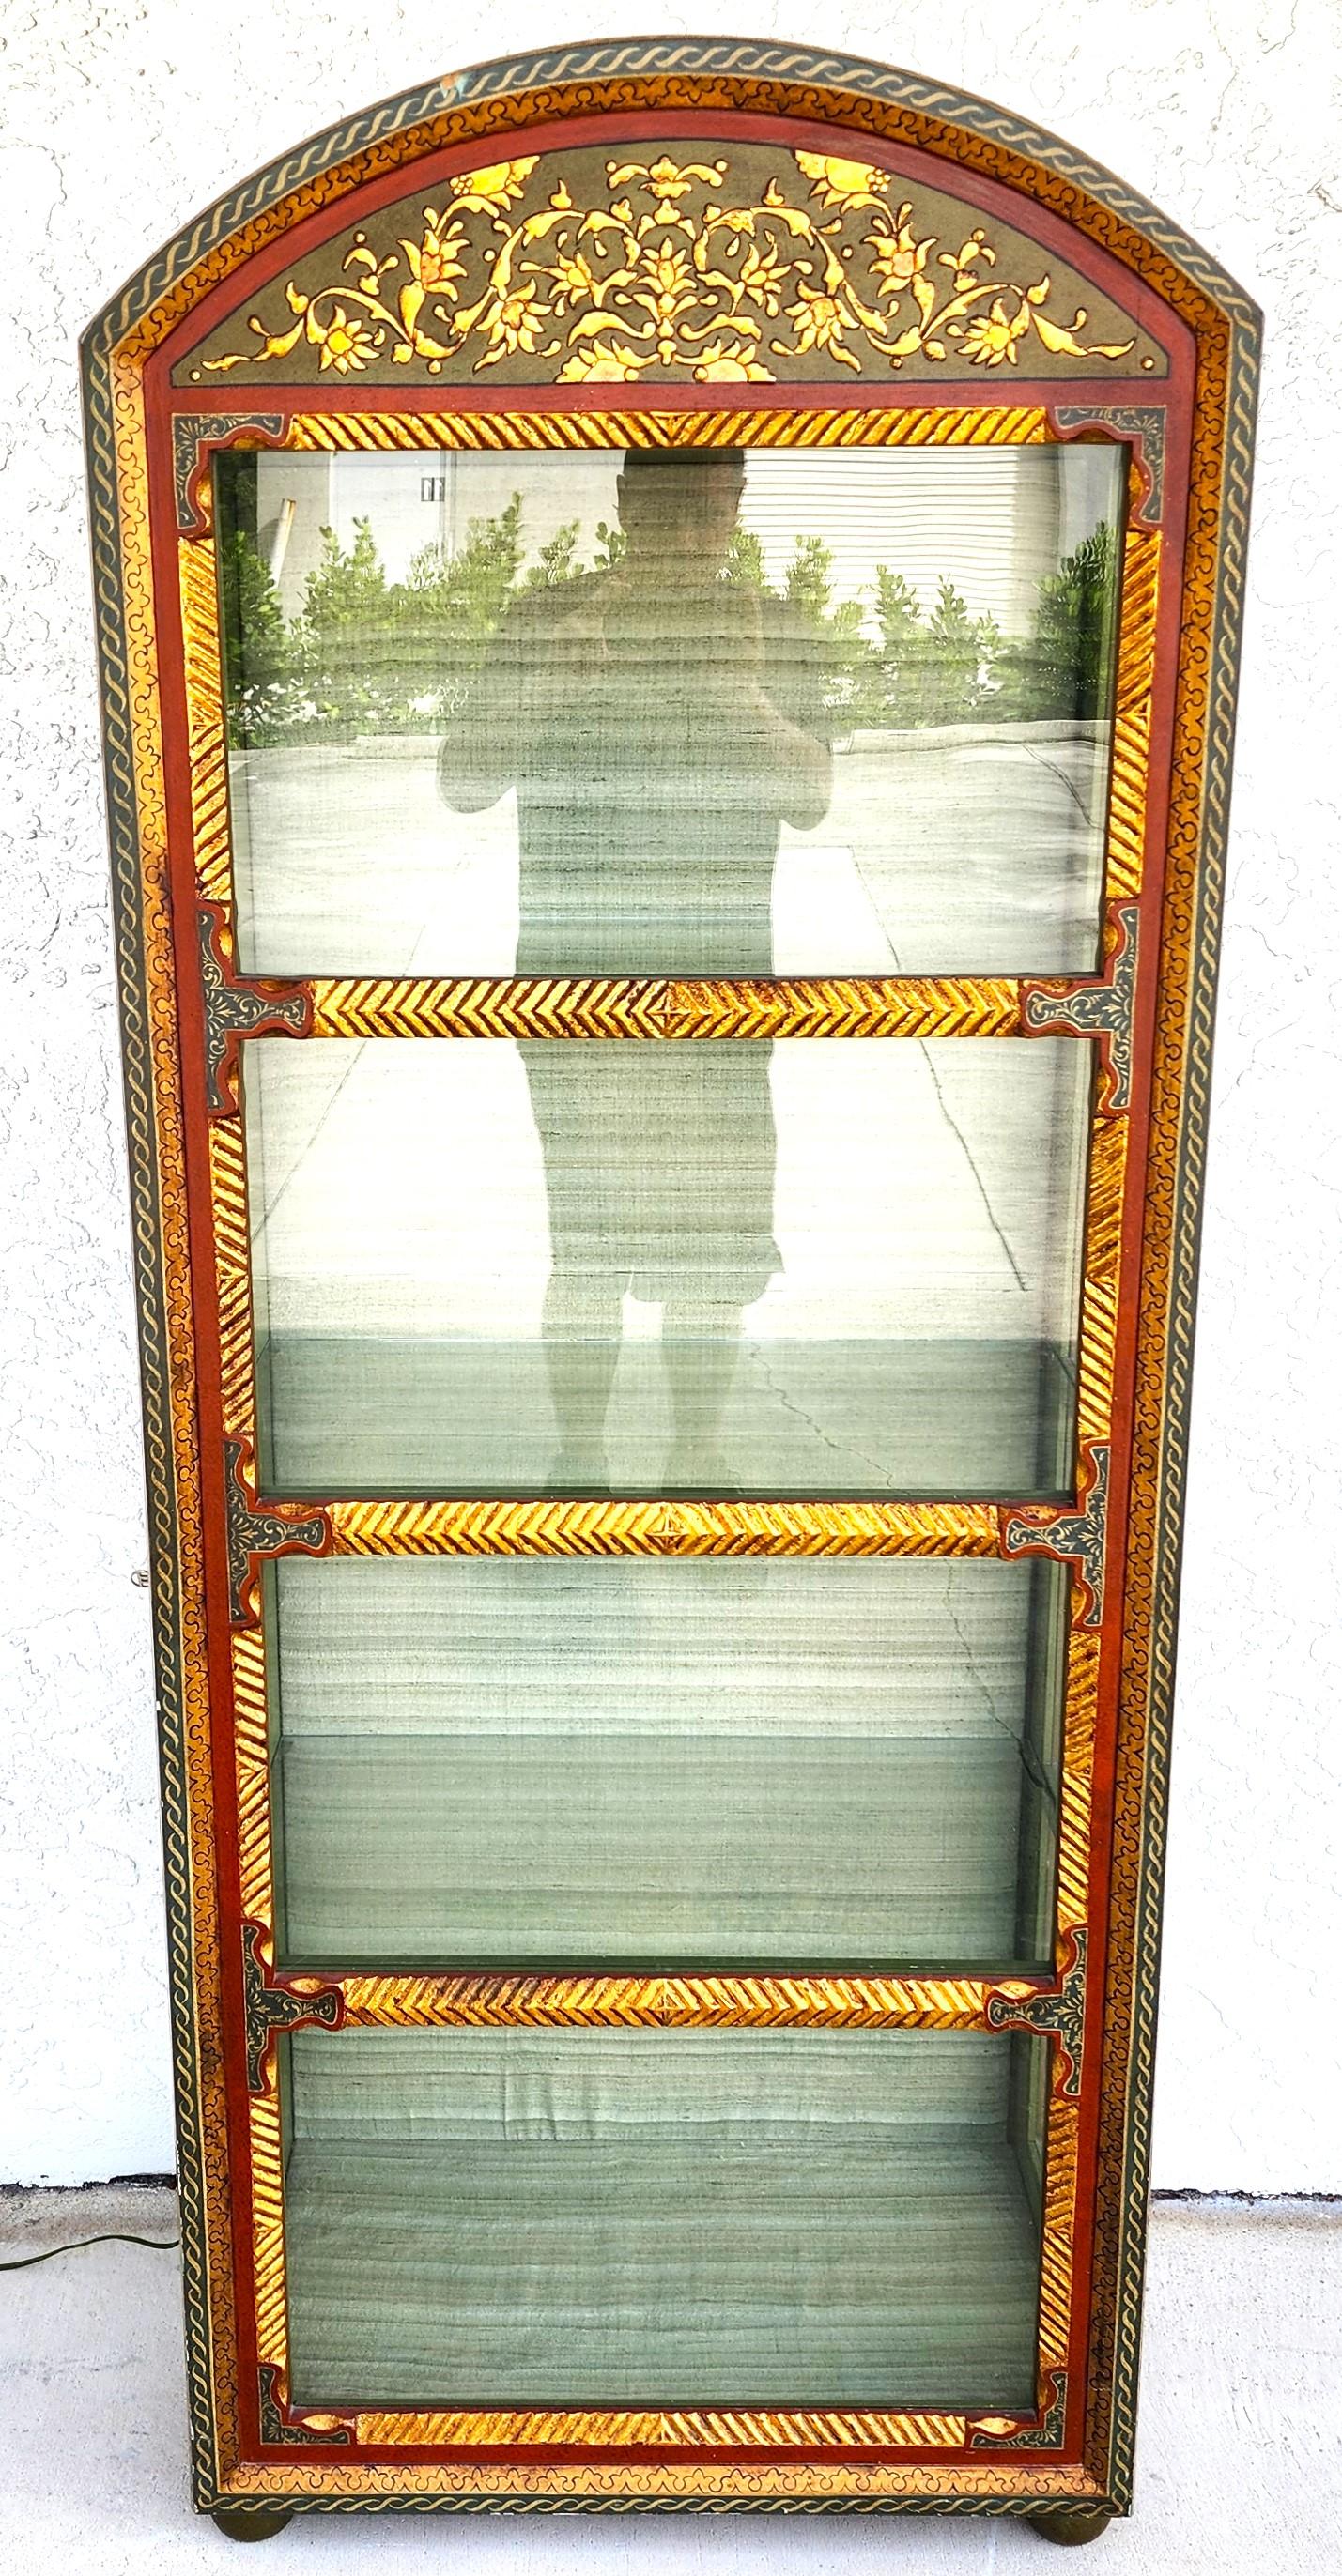 For FULL item description click on CONTINUE READING at the bottom of this page.

Offering One Of Our Recent Palm Beach Estate Fine Furniture Acquisitions Of A
Vintage French Display Curio Cabinet with Giltwood Gold Leaf and Hand-Painted accents.
Lit